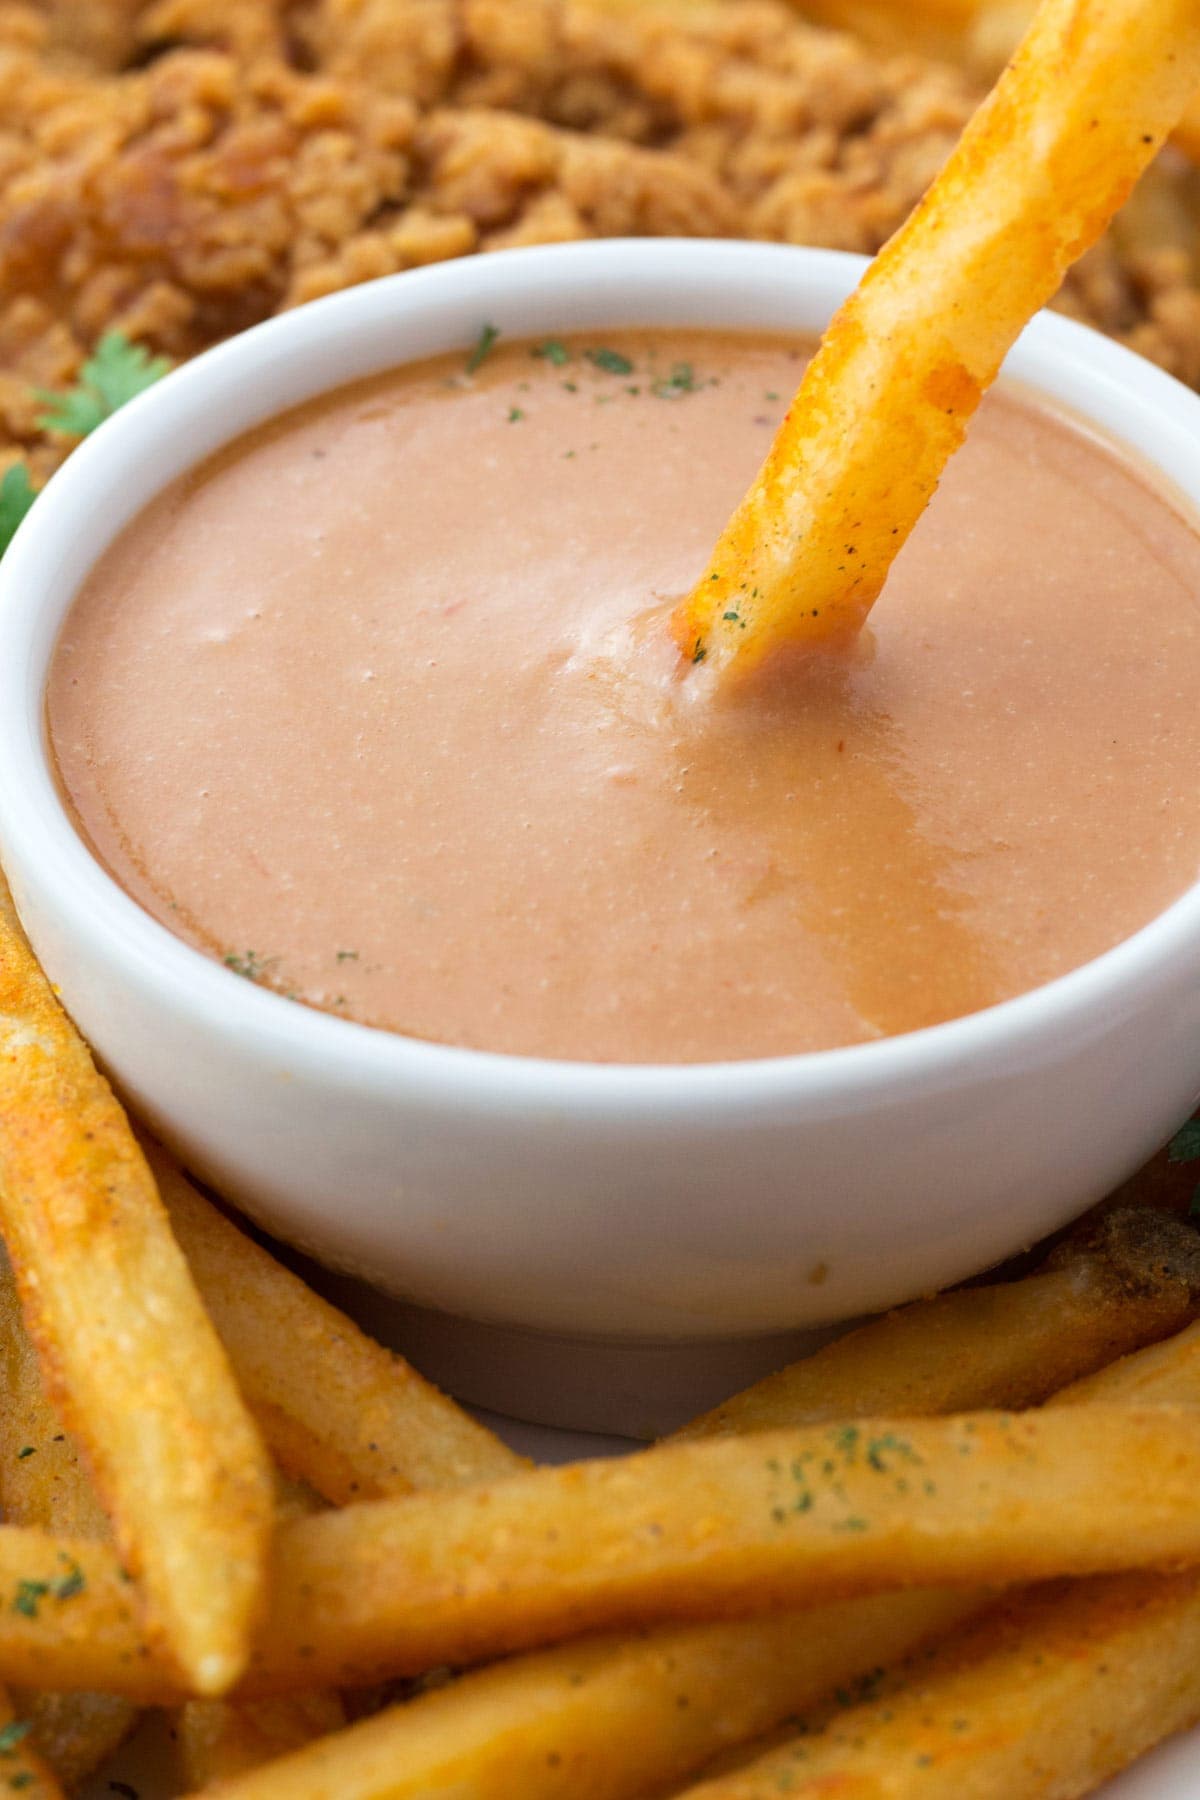 Close view of french fry being dipped into campfire sauce.